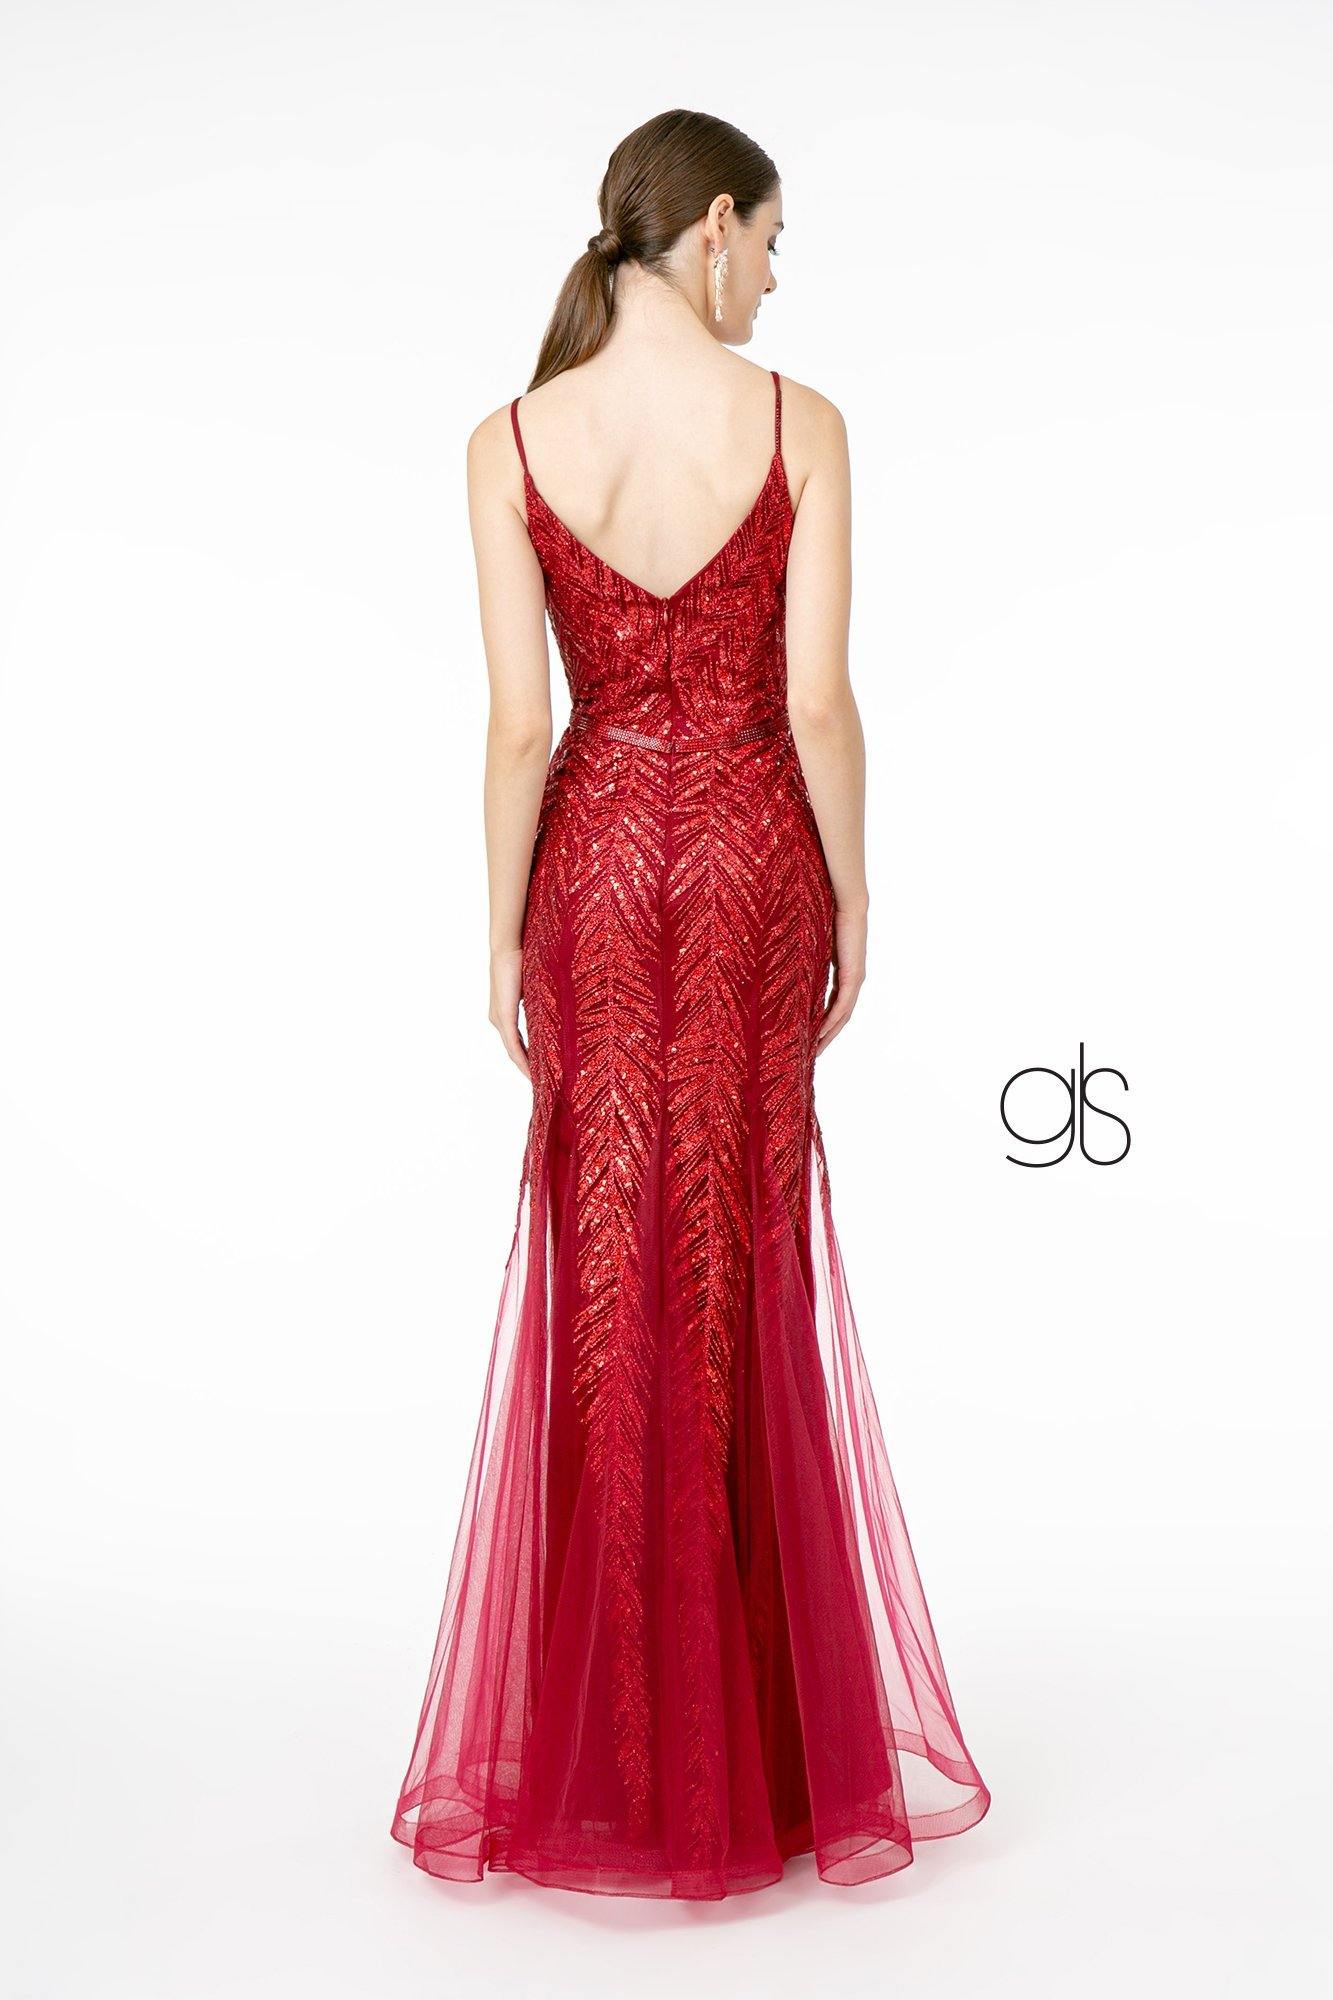 Mermaid Long Prom Dress Sale - The Dress Outlet